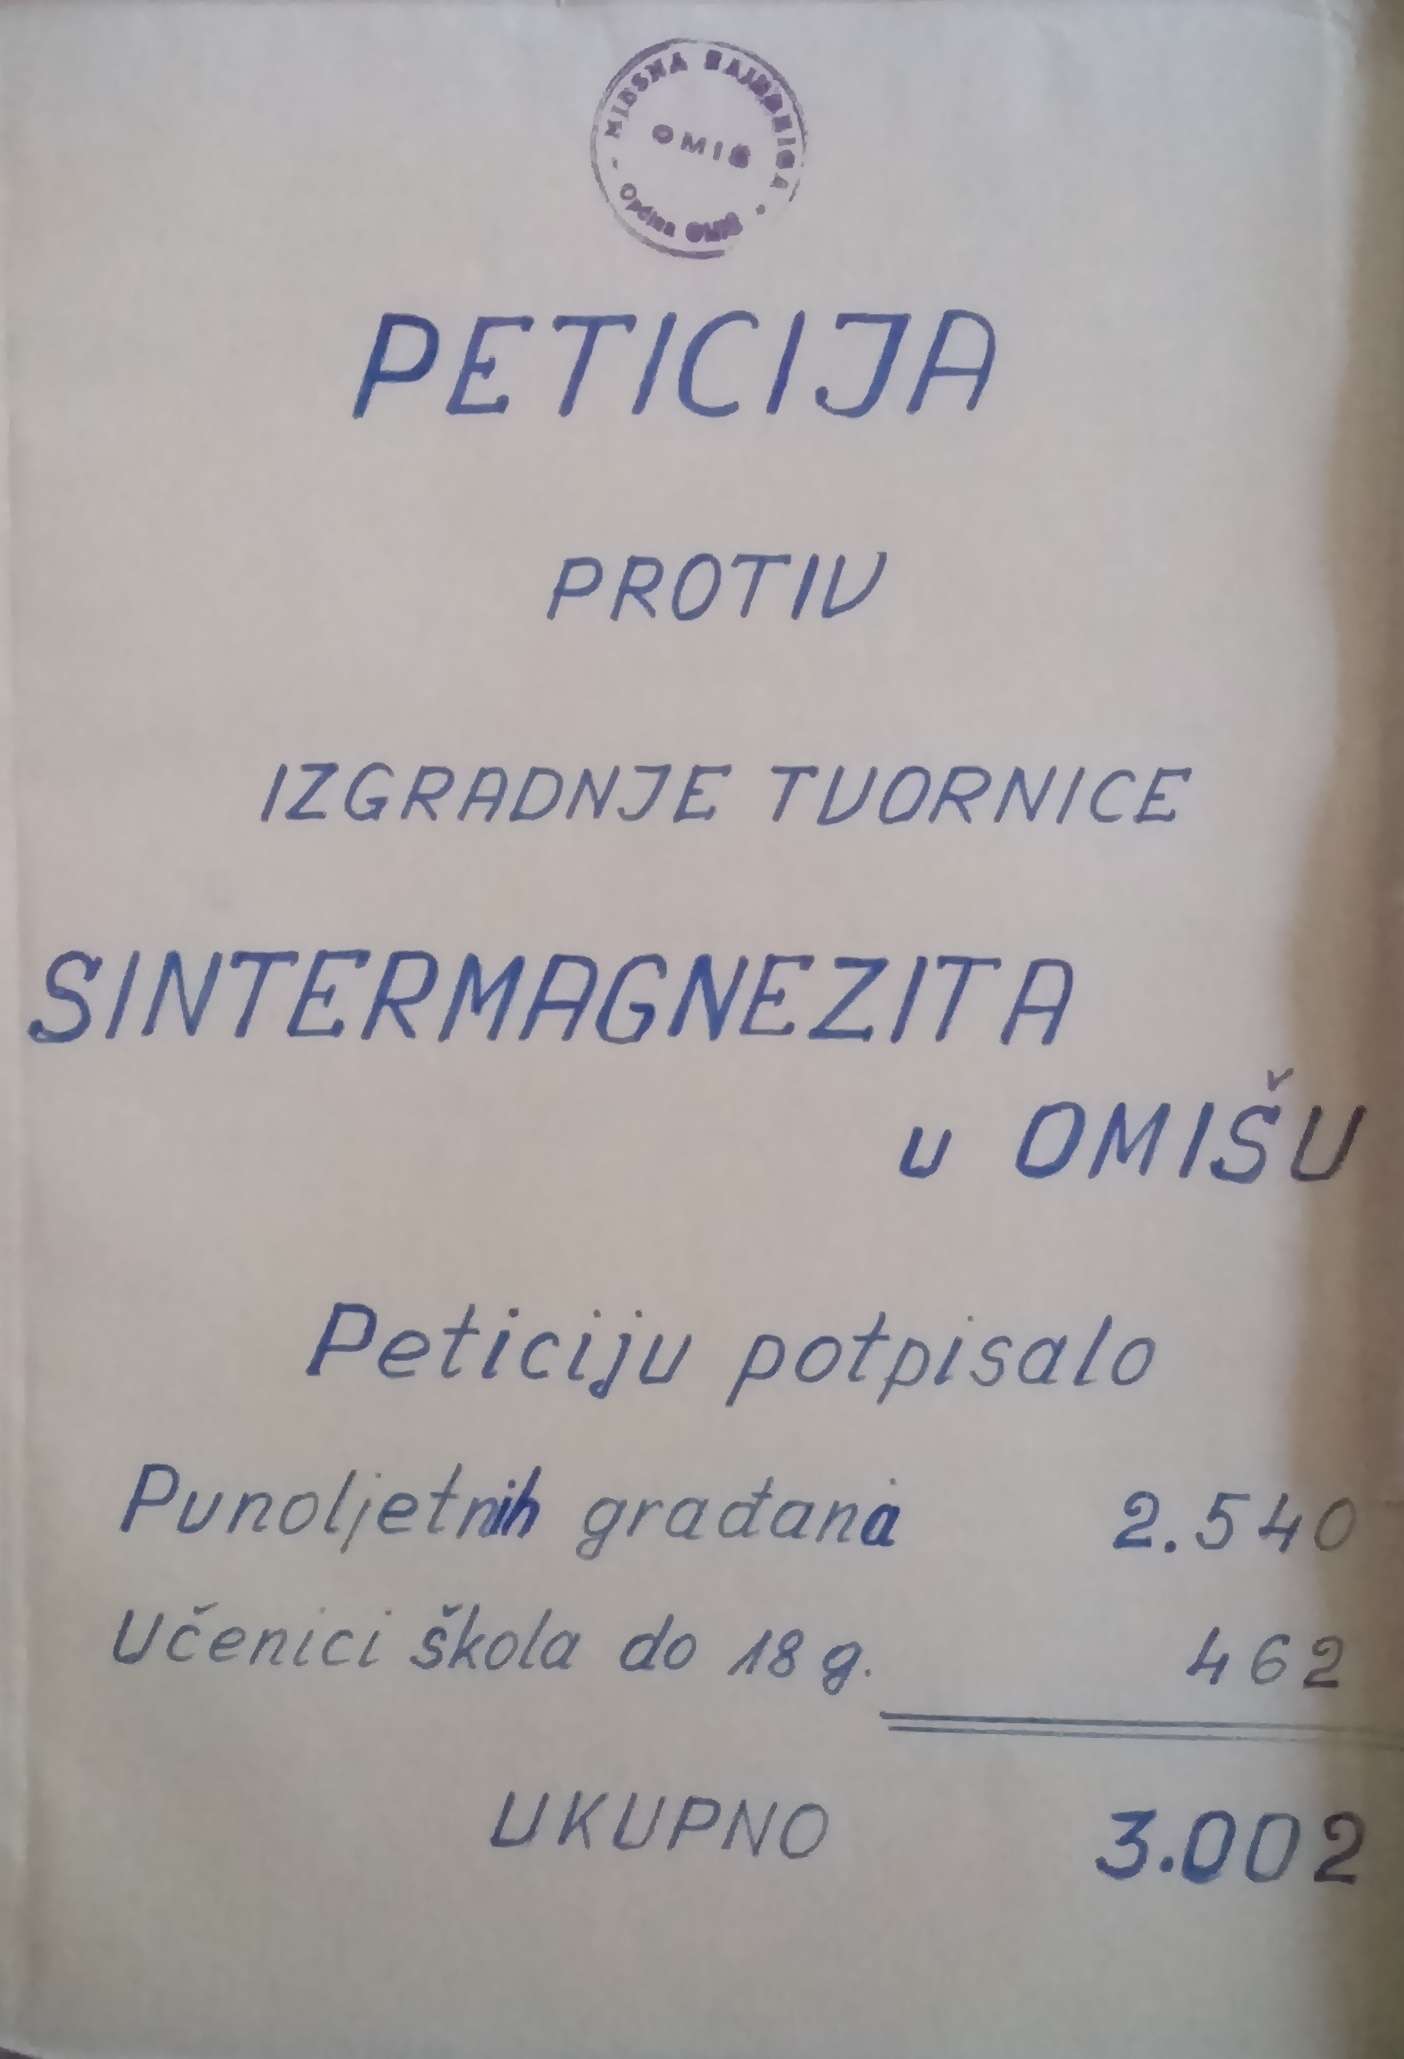 Petition letter against construction of a sintered magnesia factory in Omiš sent to the Parliament of Socialist Republic of Croatia. 12 April 1979. Archival document